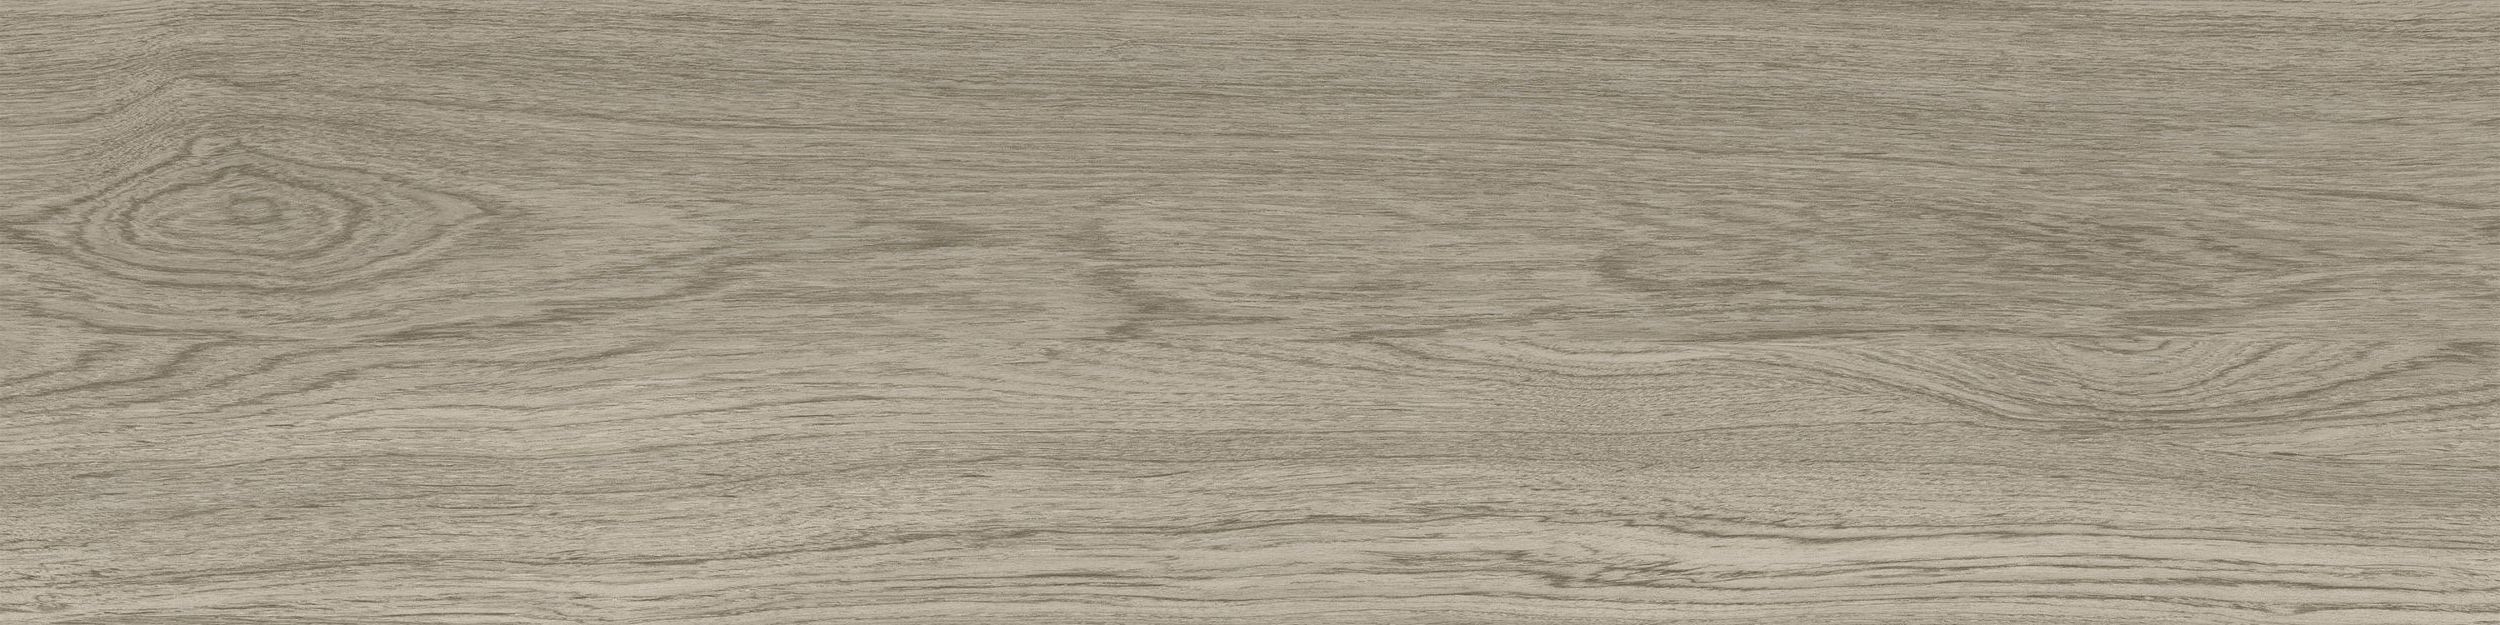 Natural Woodgrains LVT In Washed Wheat imagen número 1